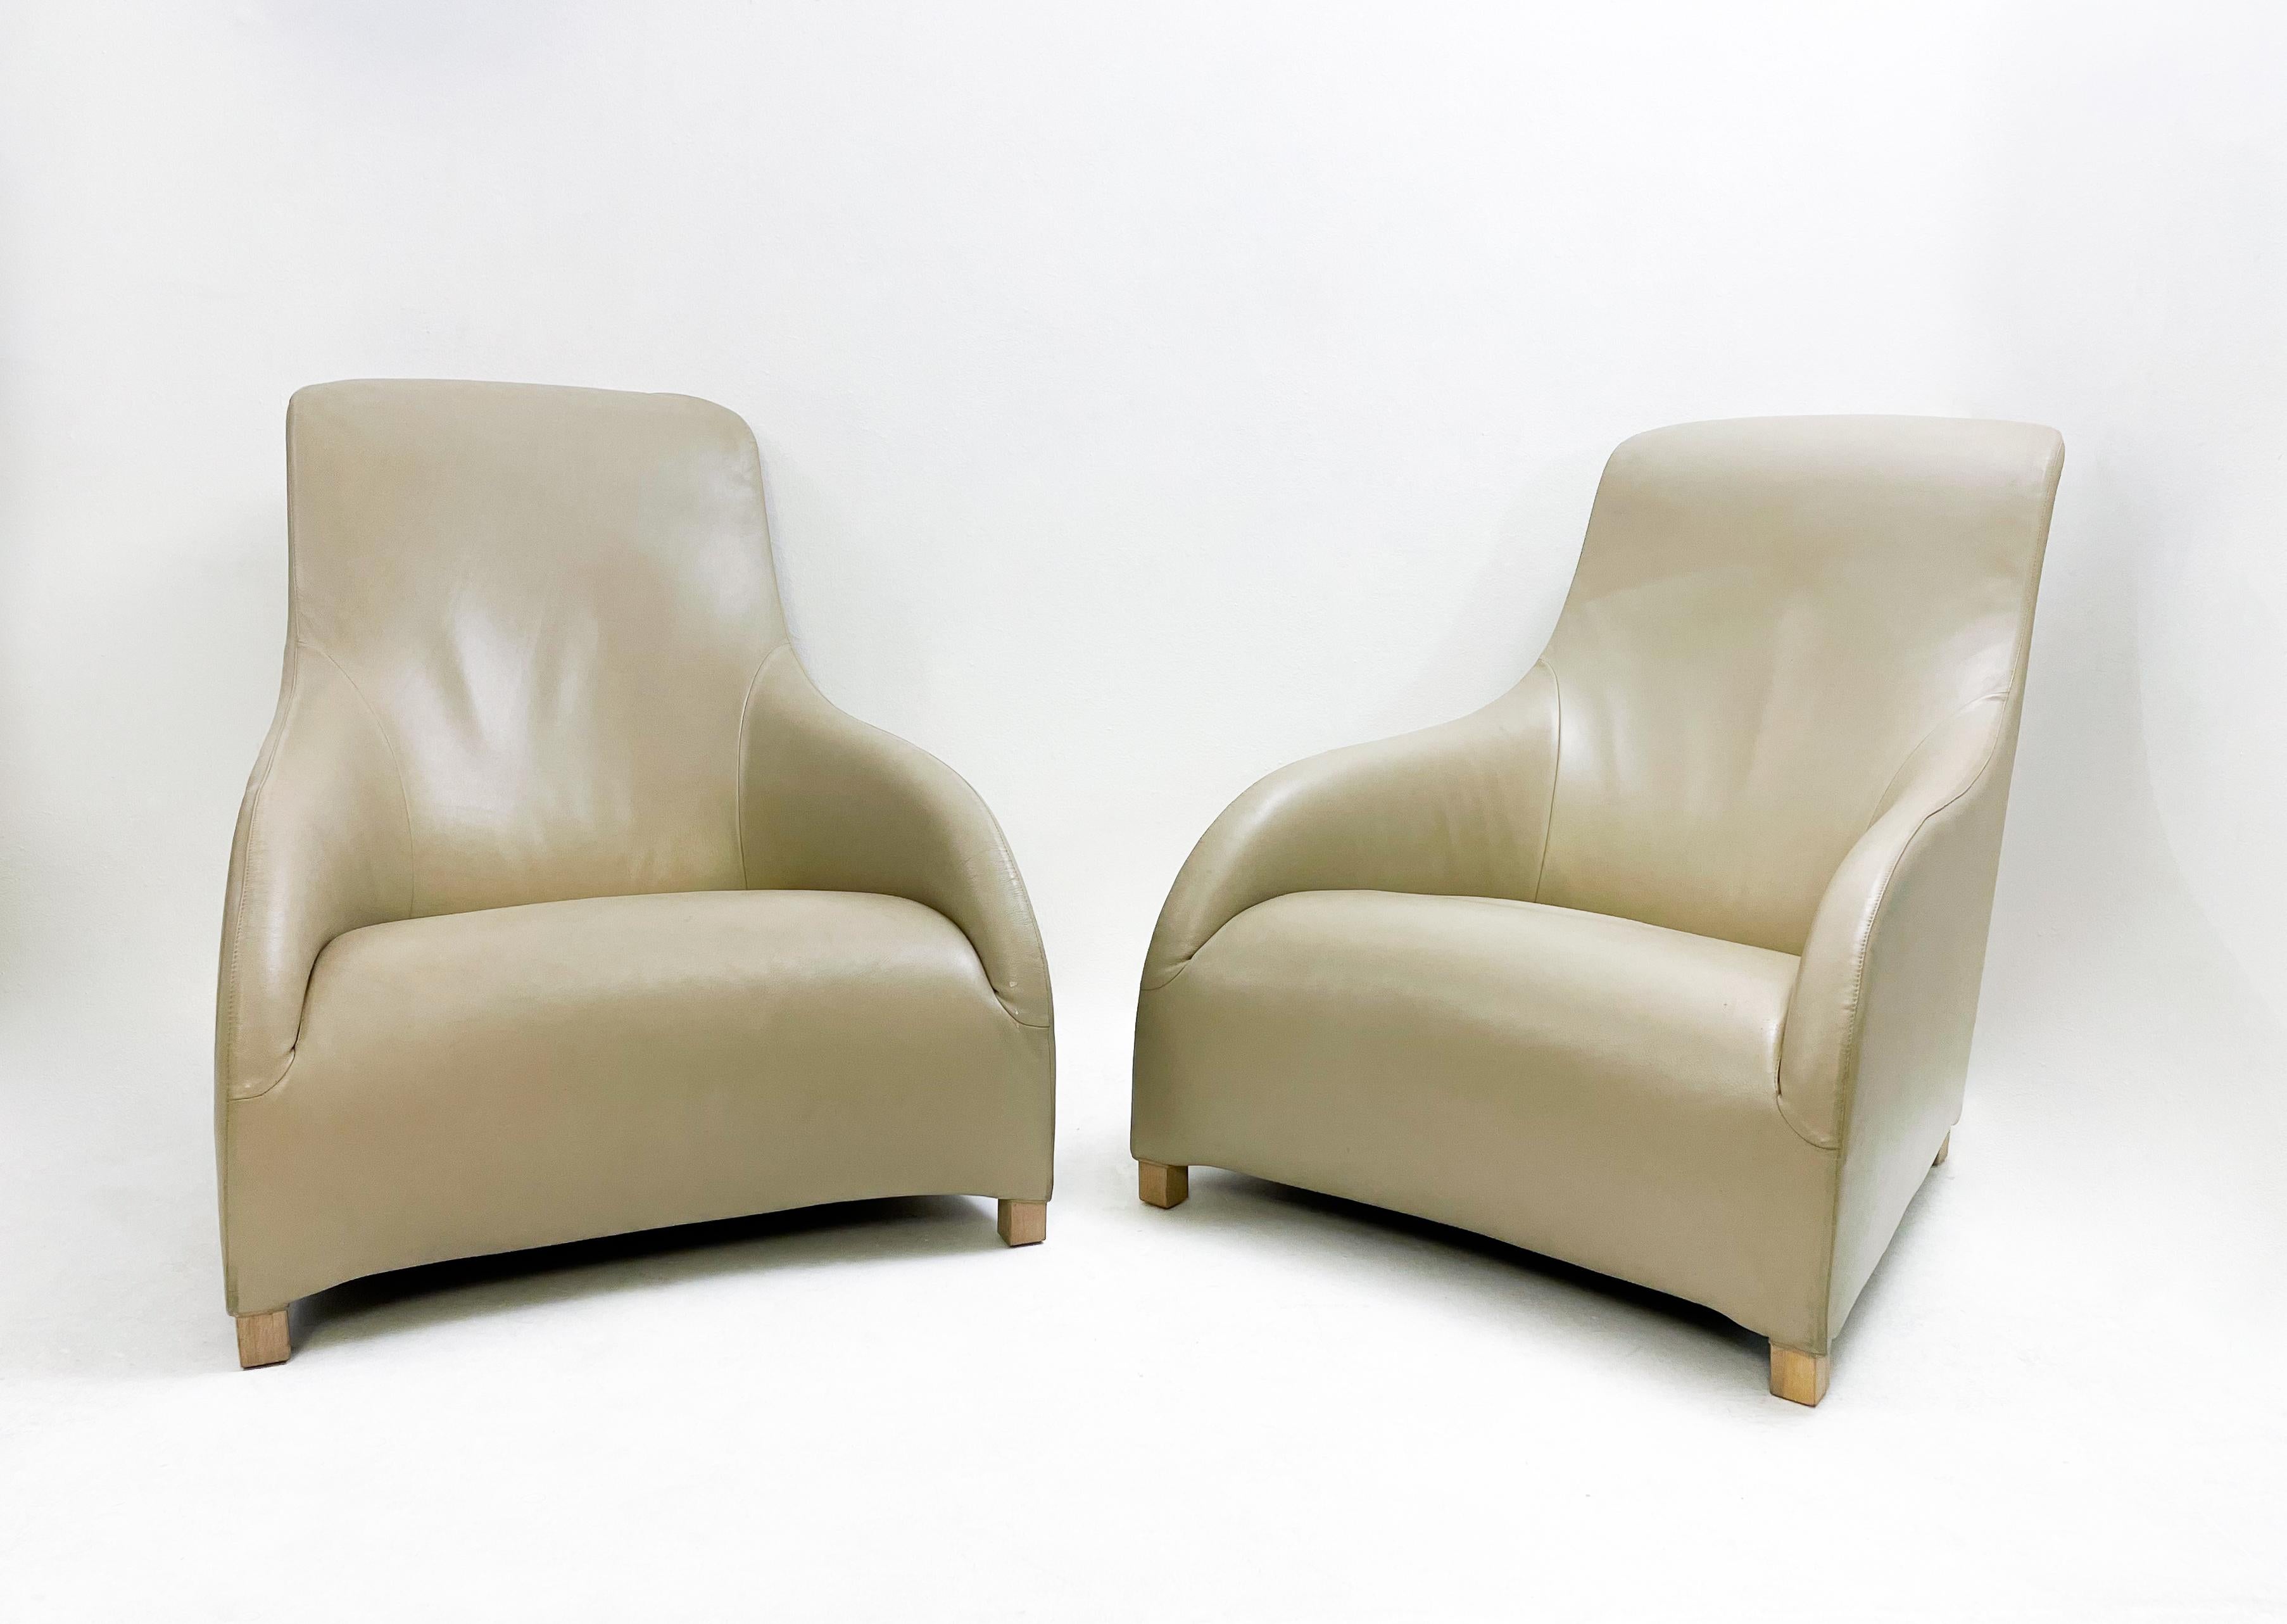 Mid-Century Modern Pair of Kalos Armchairs by Antonio Citterio for B&B Italia In Good Condition For Sale In Brussels, BE